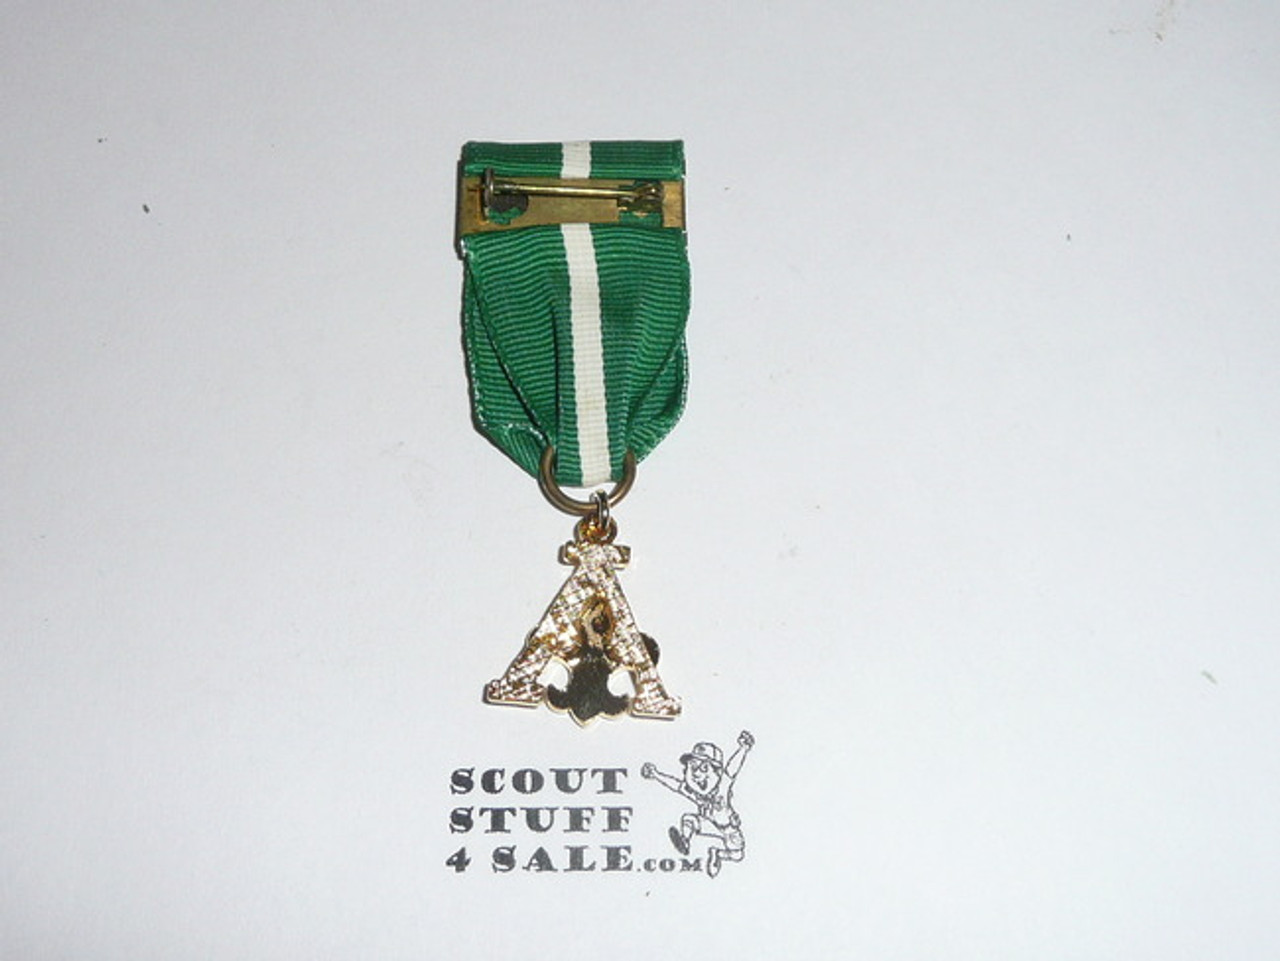 Scouter's Training Award Medal with Green/white Ribbon (A Design), shows use